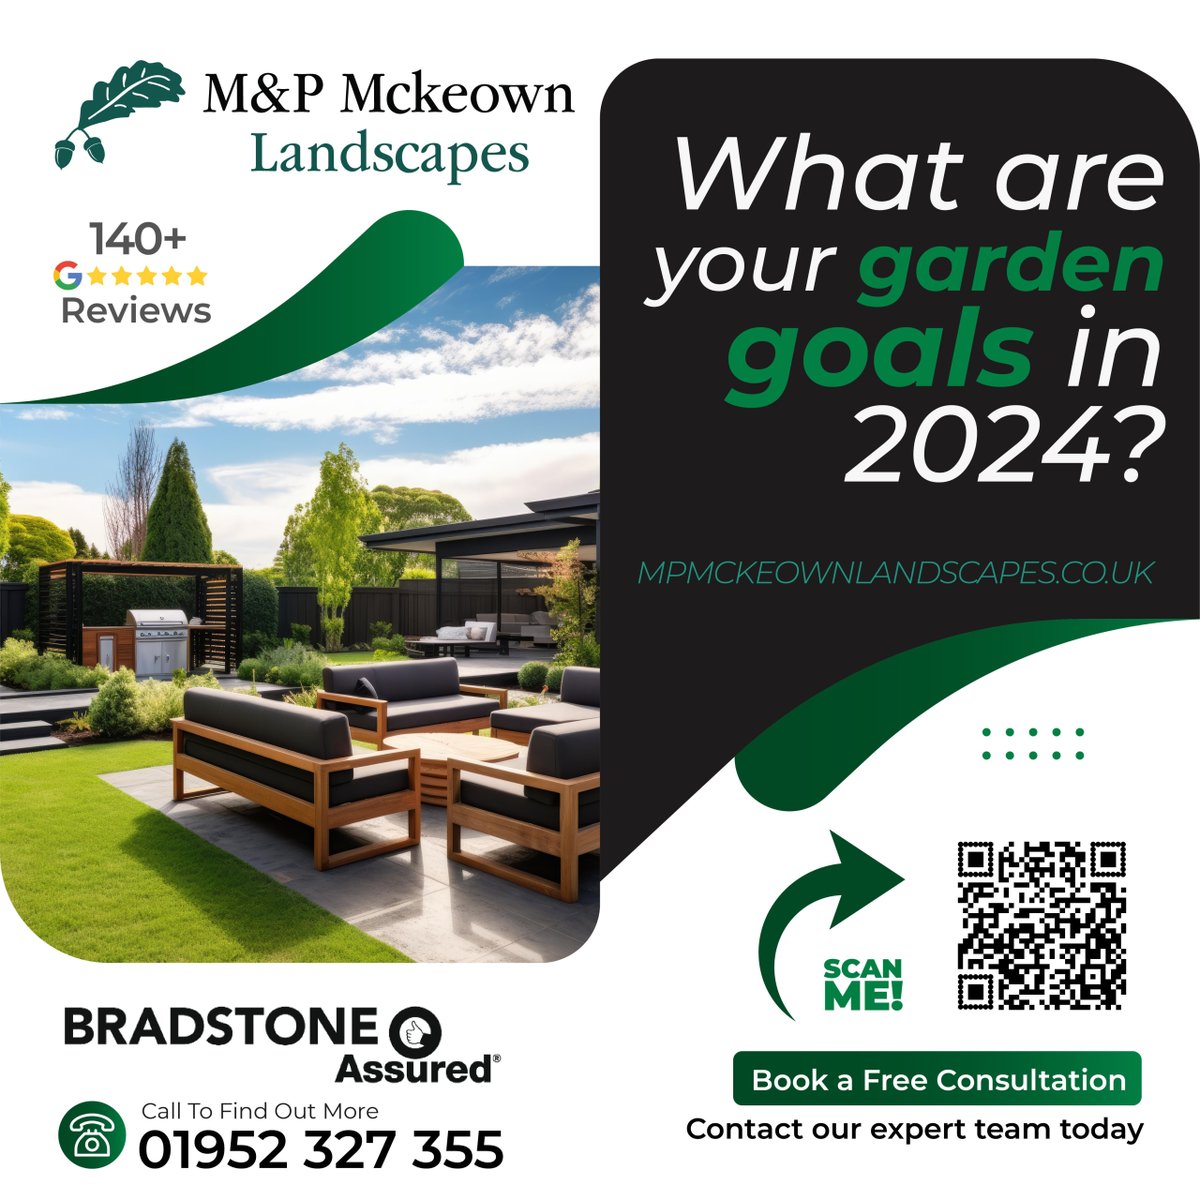 What are your garden goals in 2024?

To book your design consultation today visit our website mpmckeownlandscapes.co.uk

🔗 #gardeninspiration #gardenideas #landscaping #moderngarden #gardendesign #garden #outdoorliving